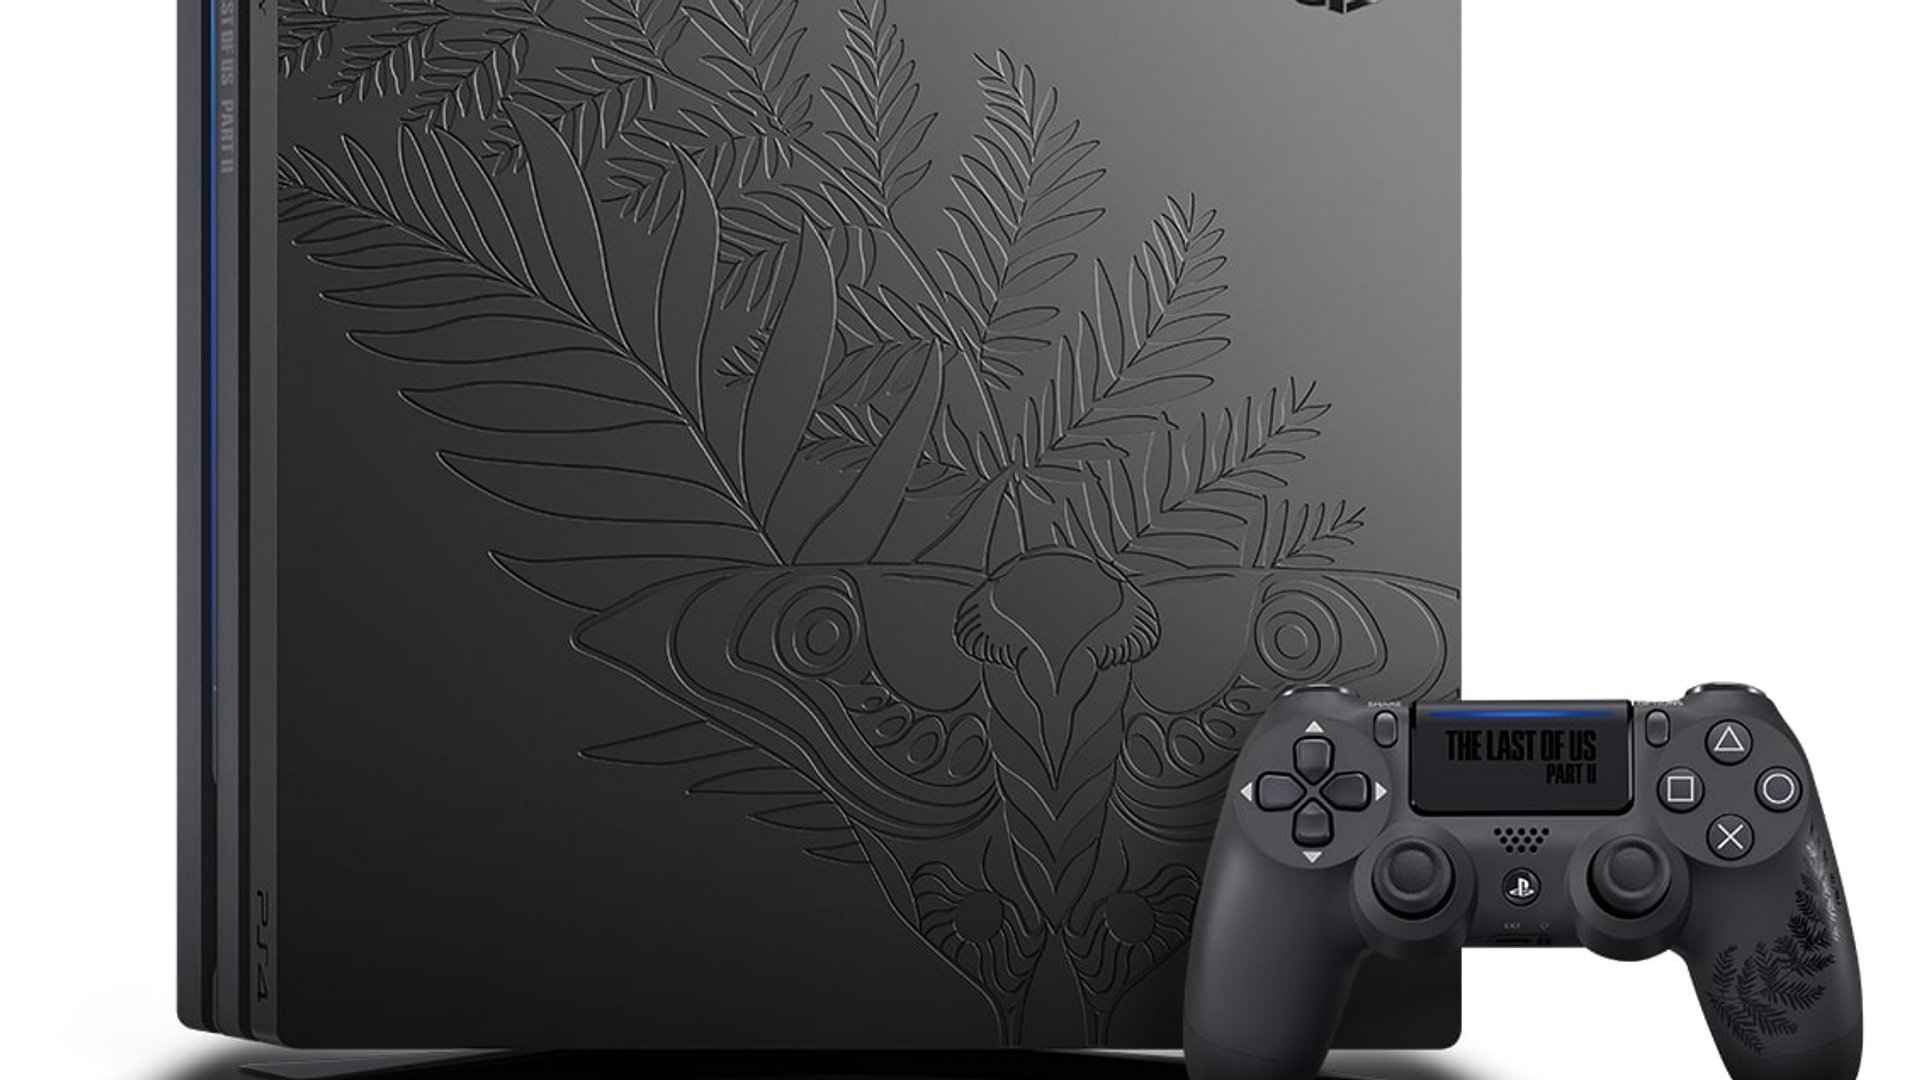 Last limited. Sony PLAYSTATION 4 Slim. Ps4 Pro Edition. Ps4 PLAYSTATION 4 Pro. Sony PLAYSTATION 4 Pro Limited Edition.